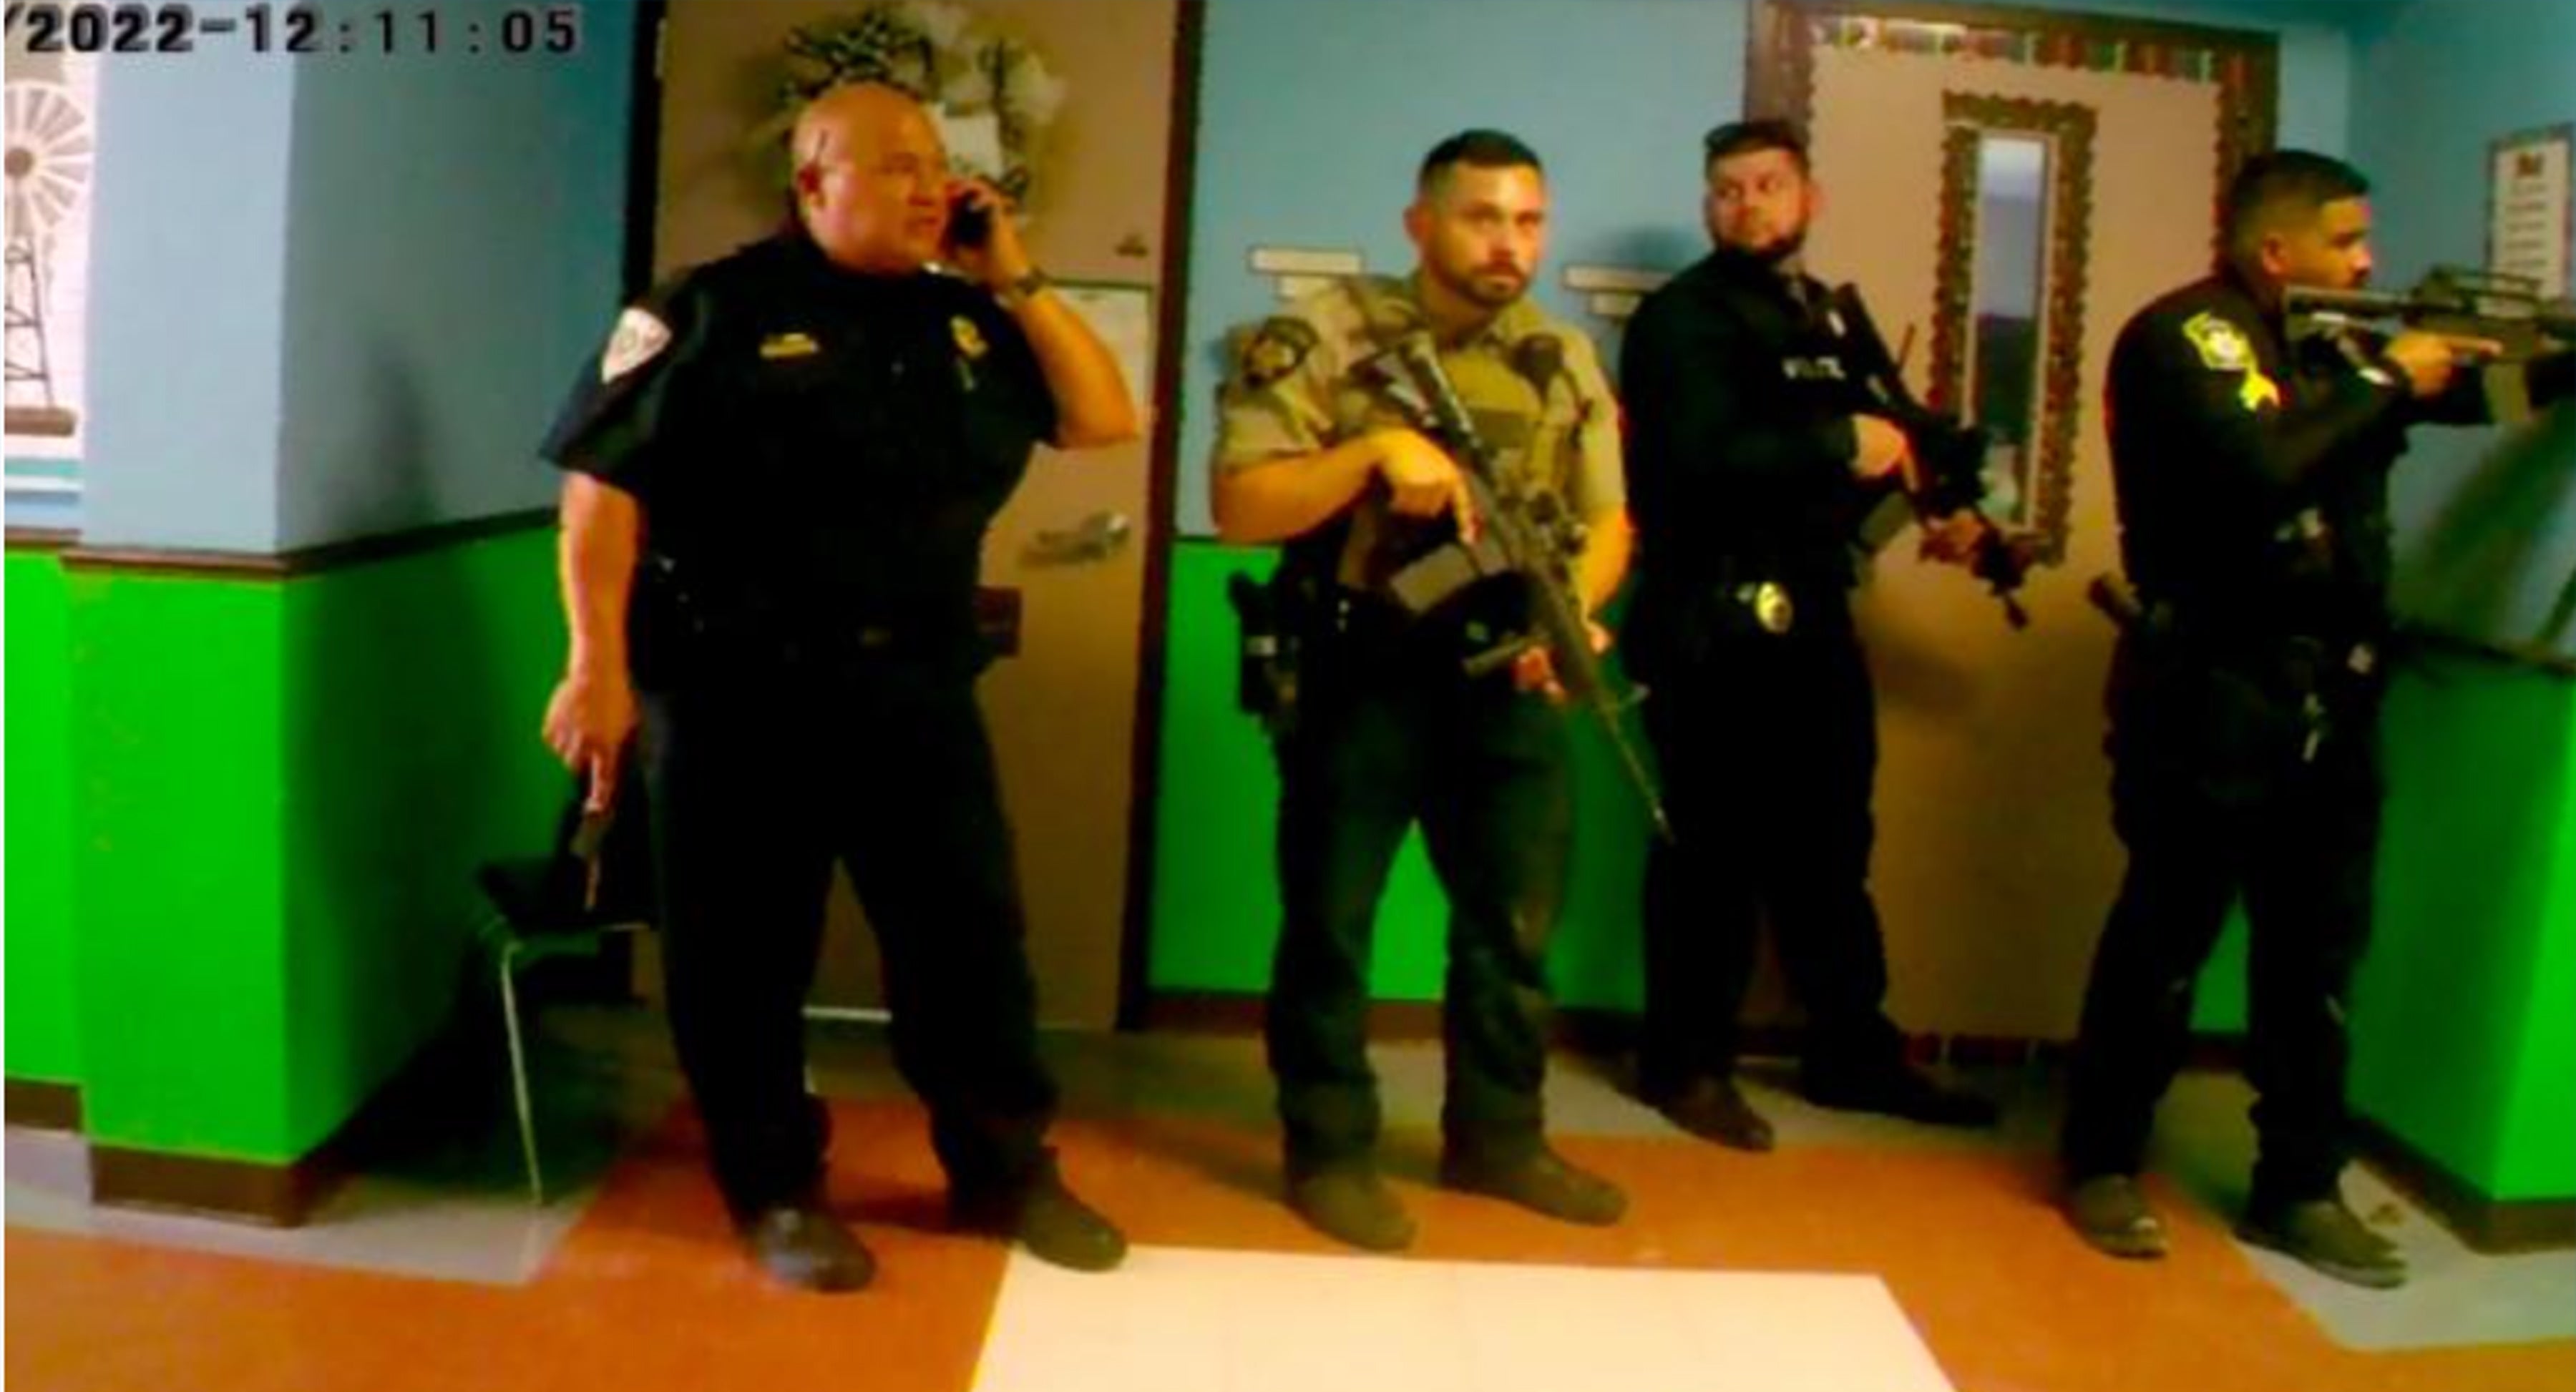 Law enforcement officers stand in the hallway of the school failing to enter as the shooting continues